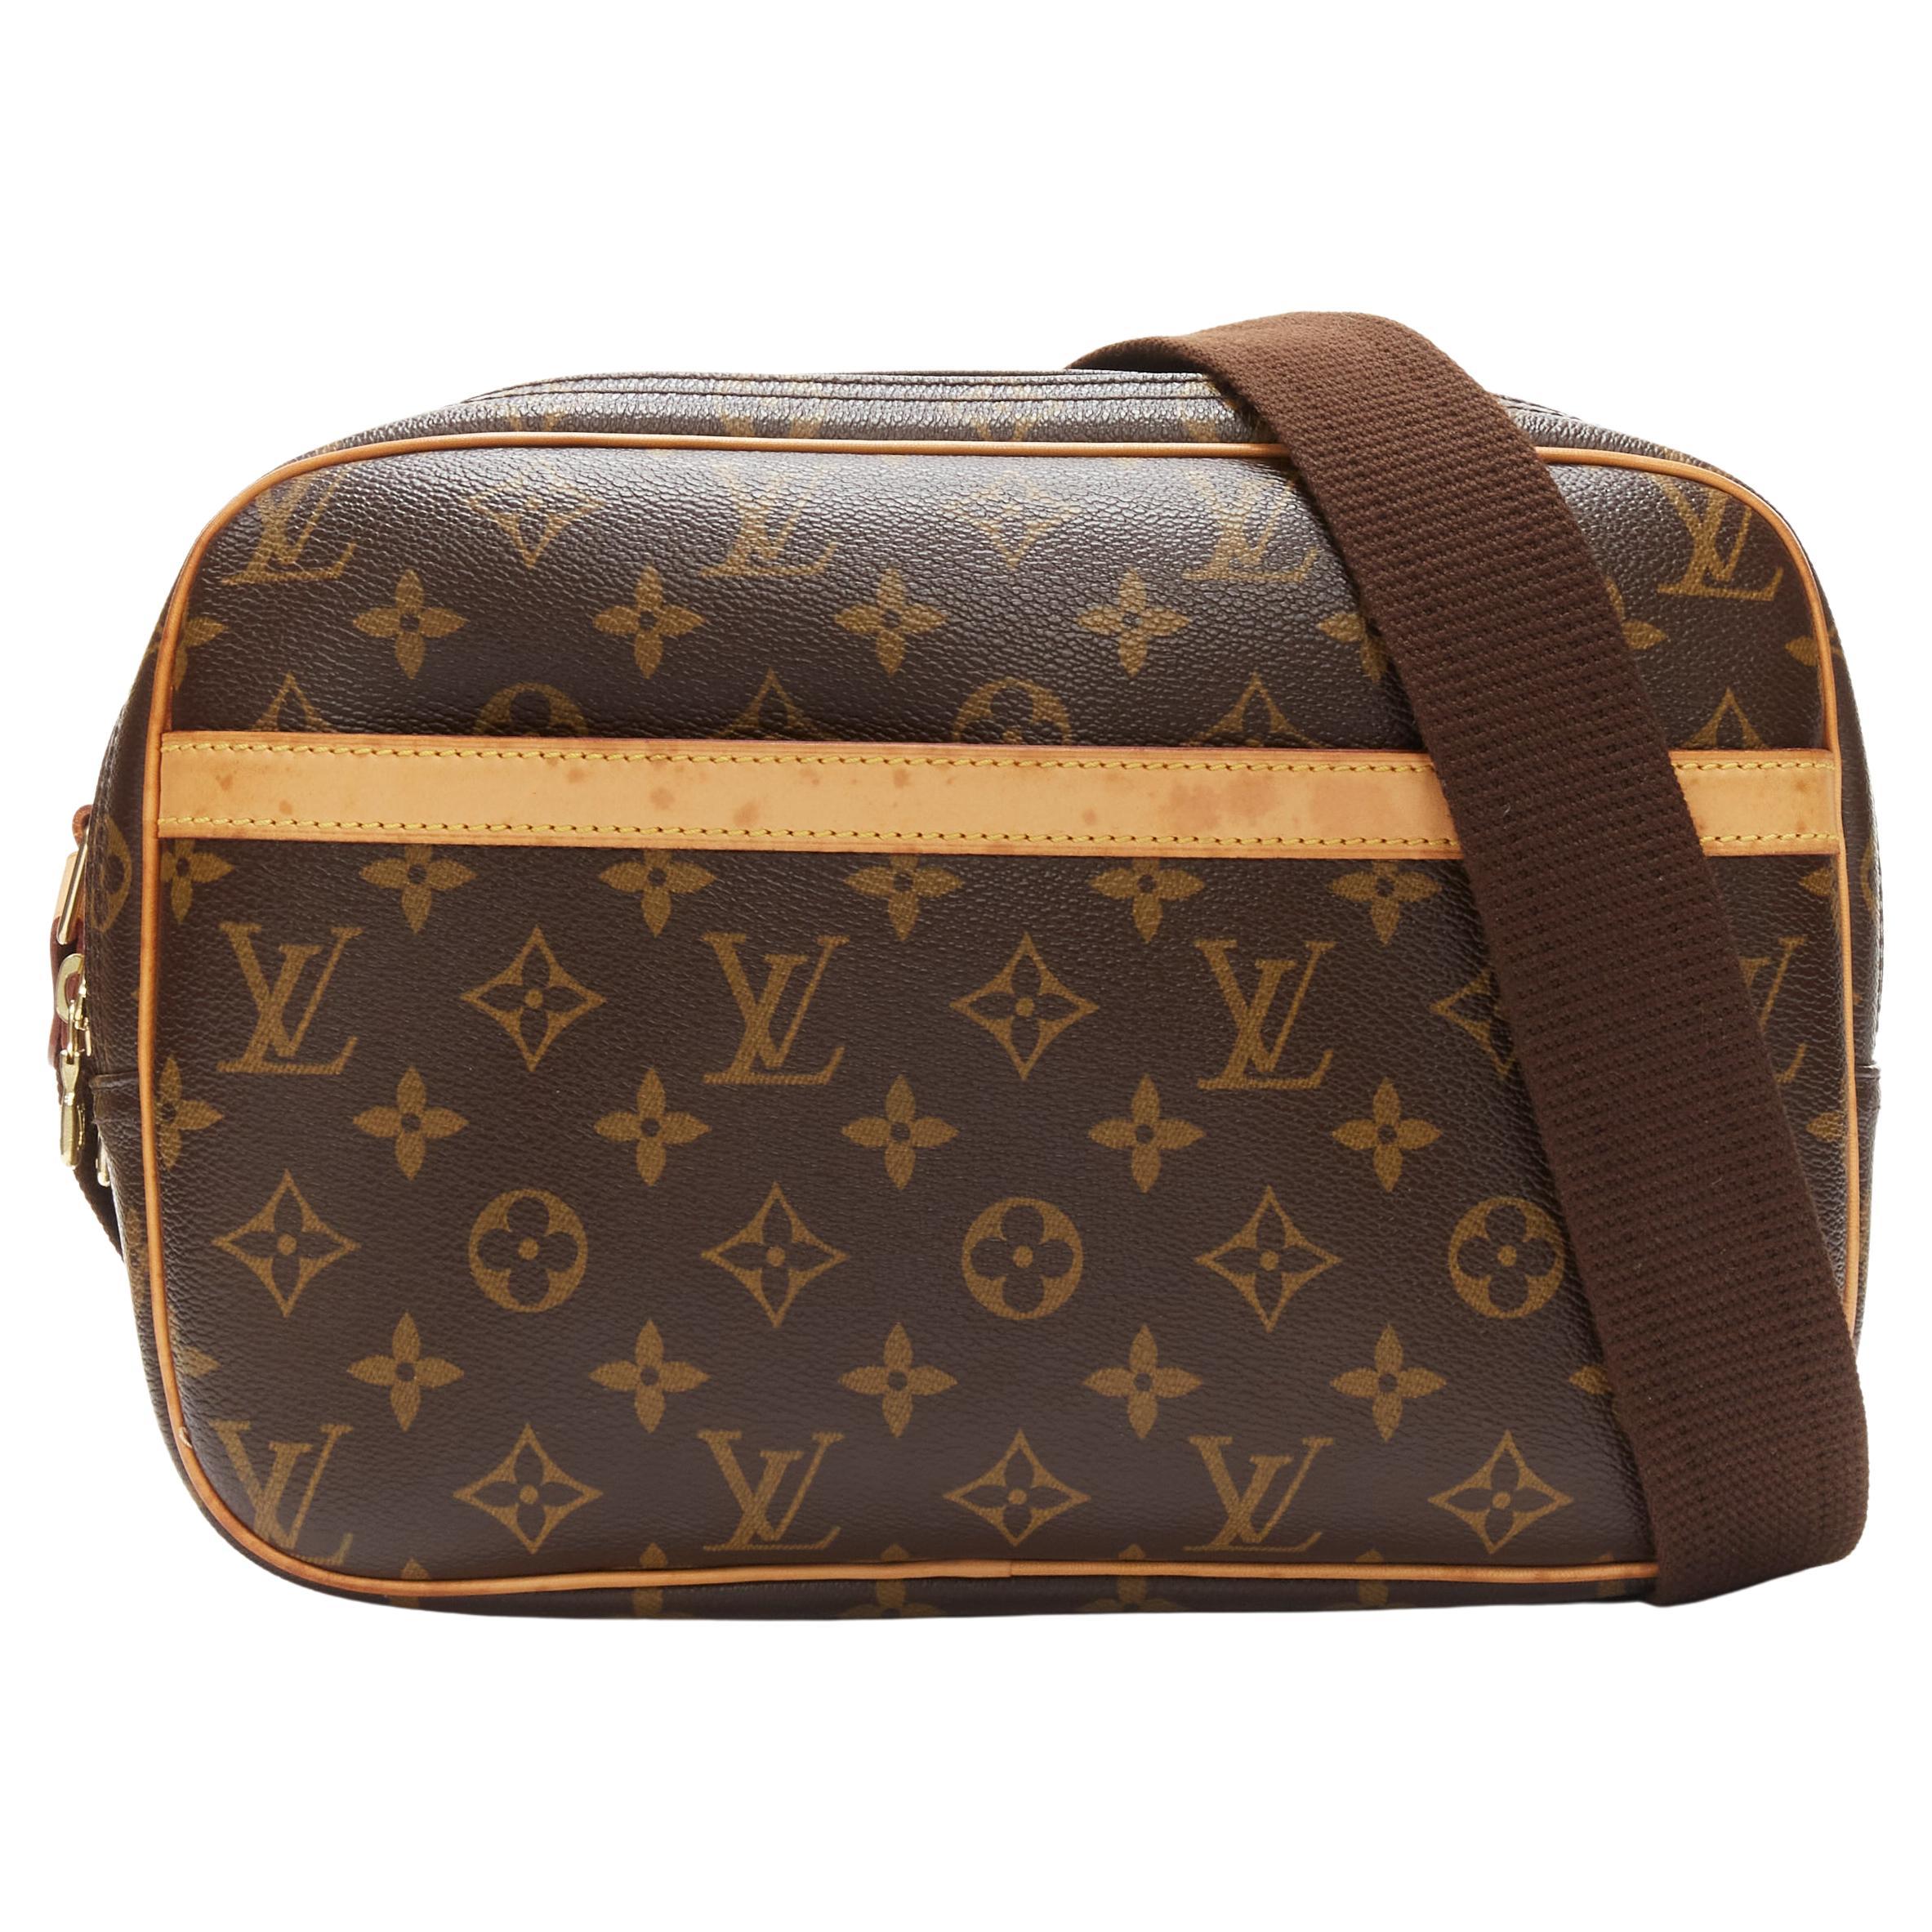 SOLD Louis Vuitton, Diane PM brand new never used $2,350